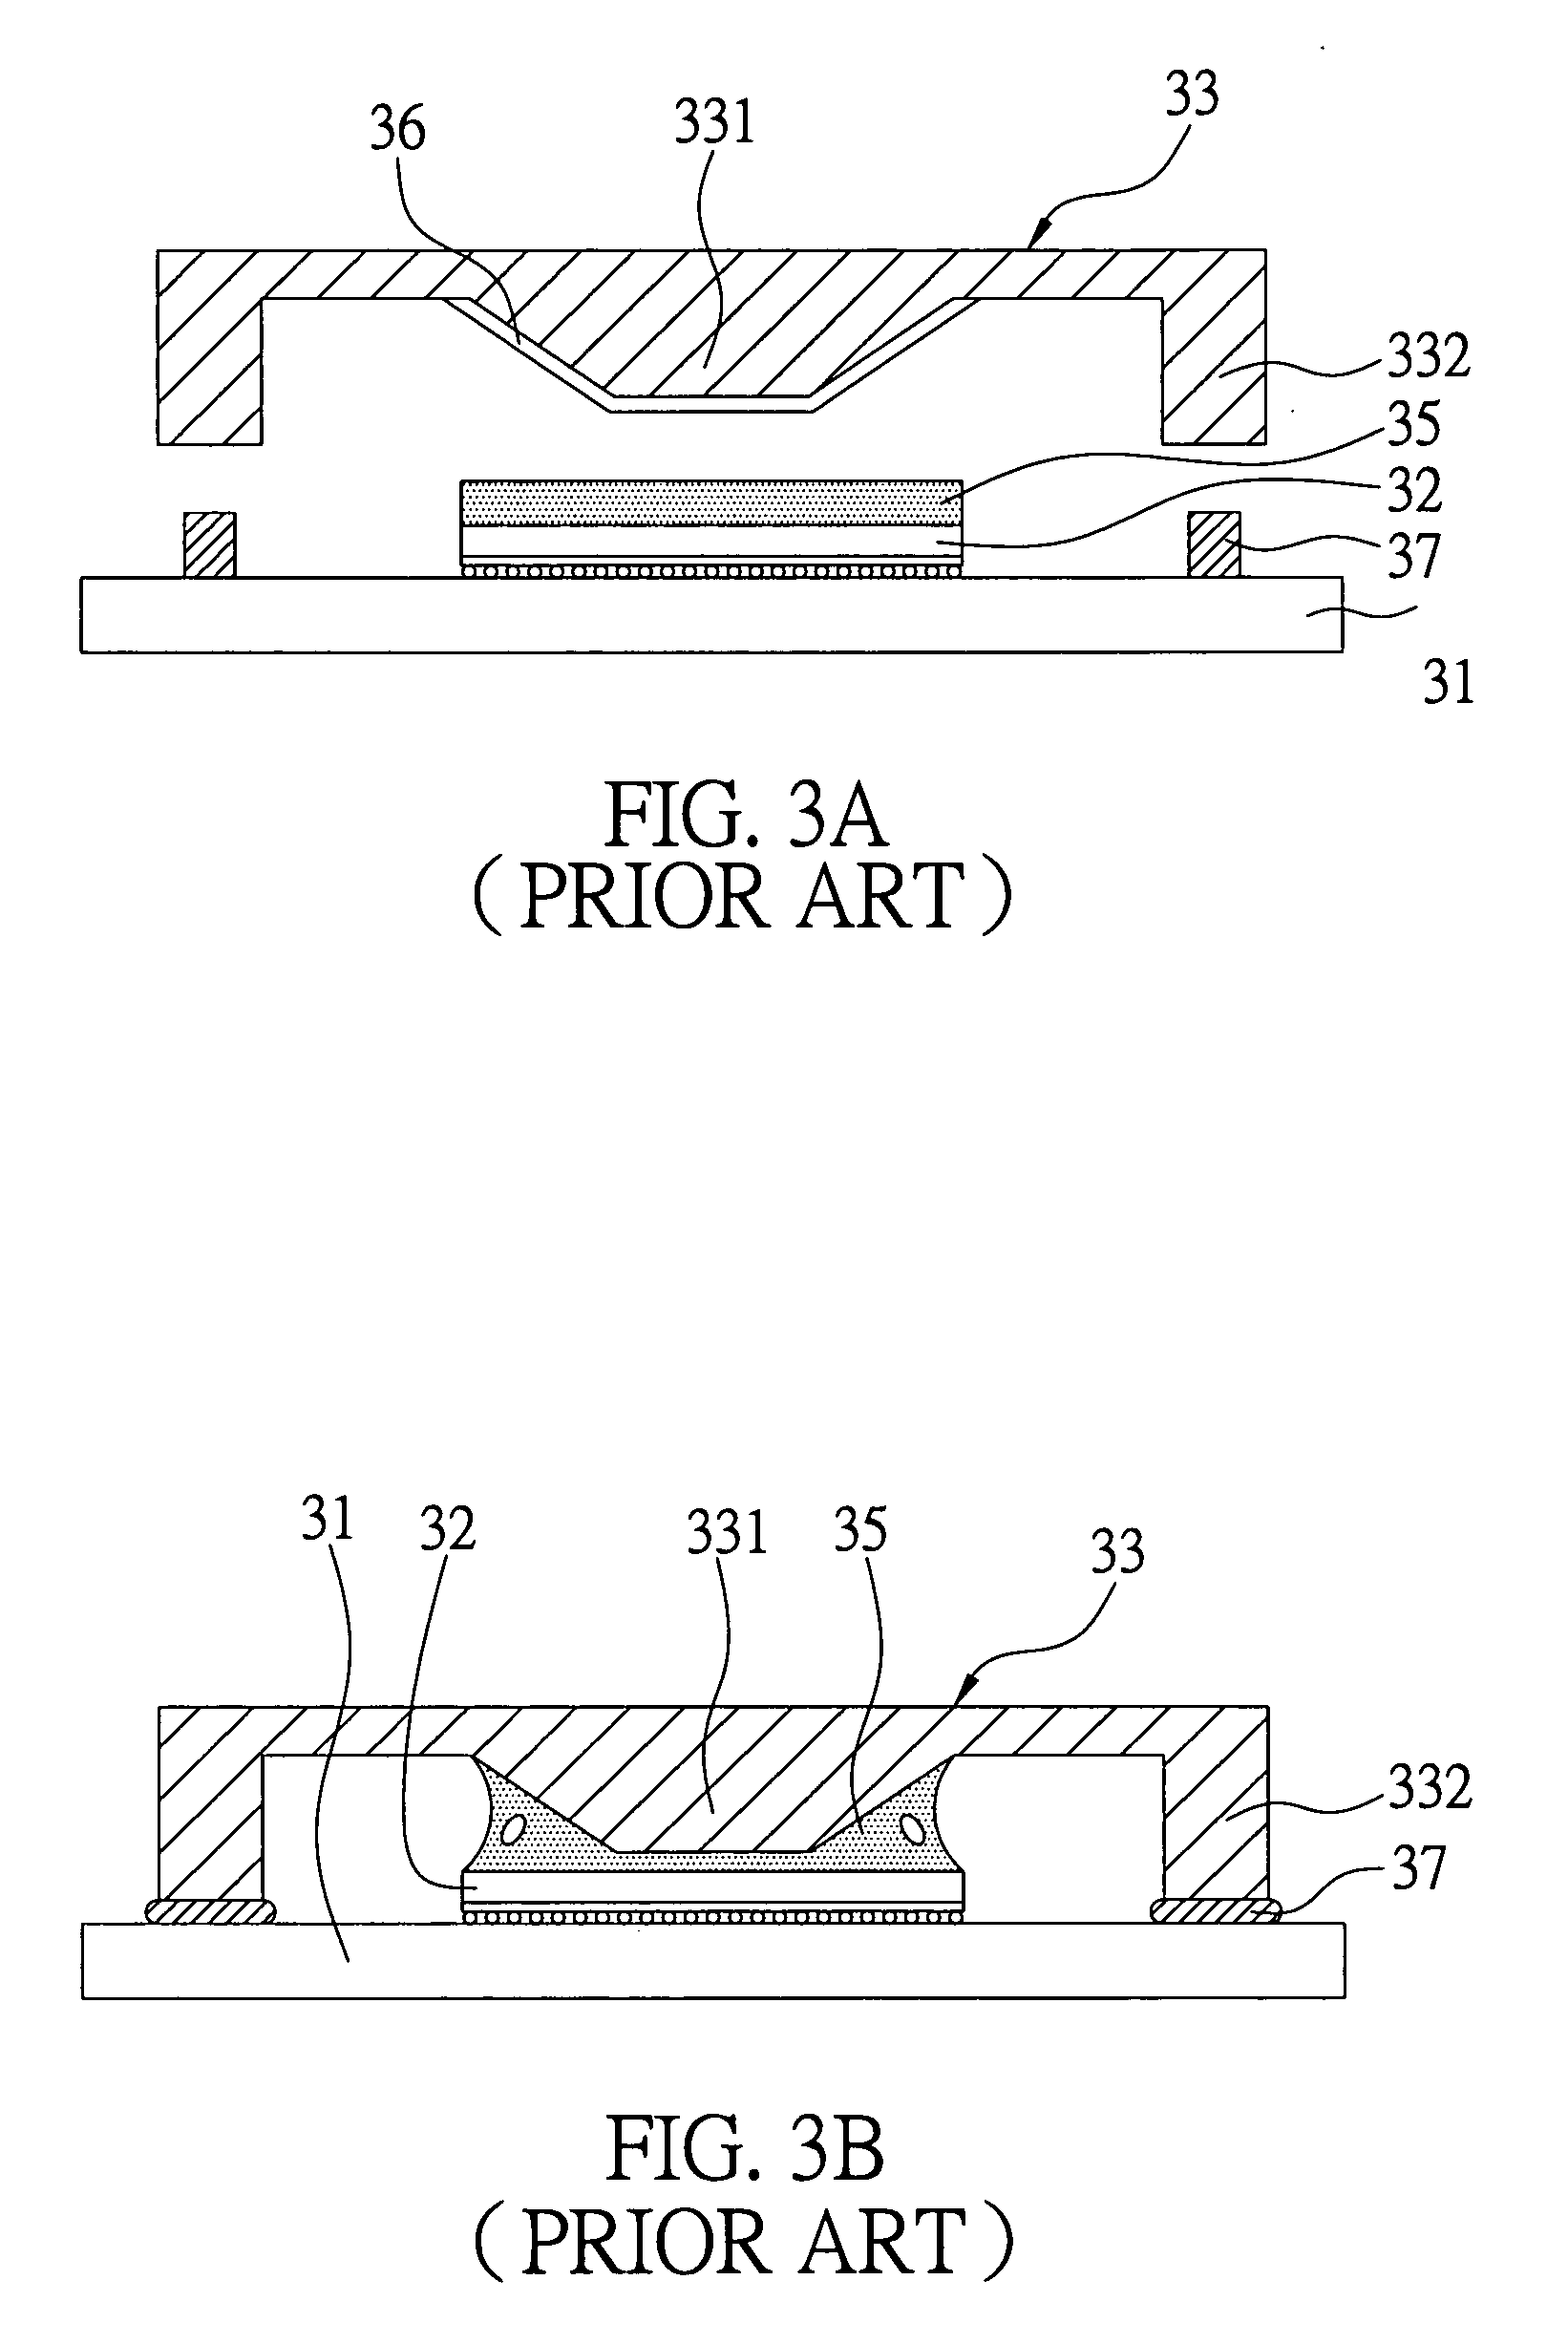 Heat dissipating semiconductor package